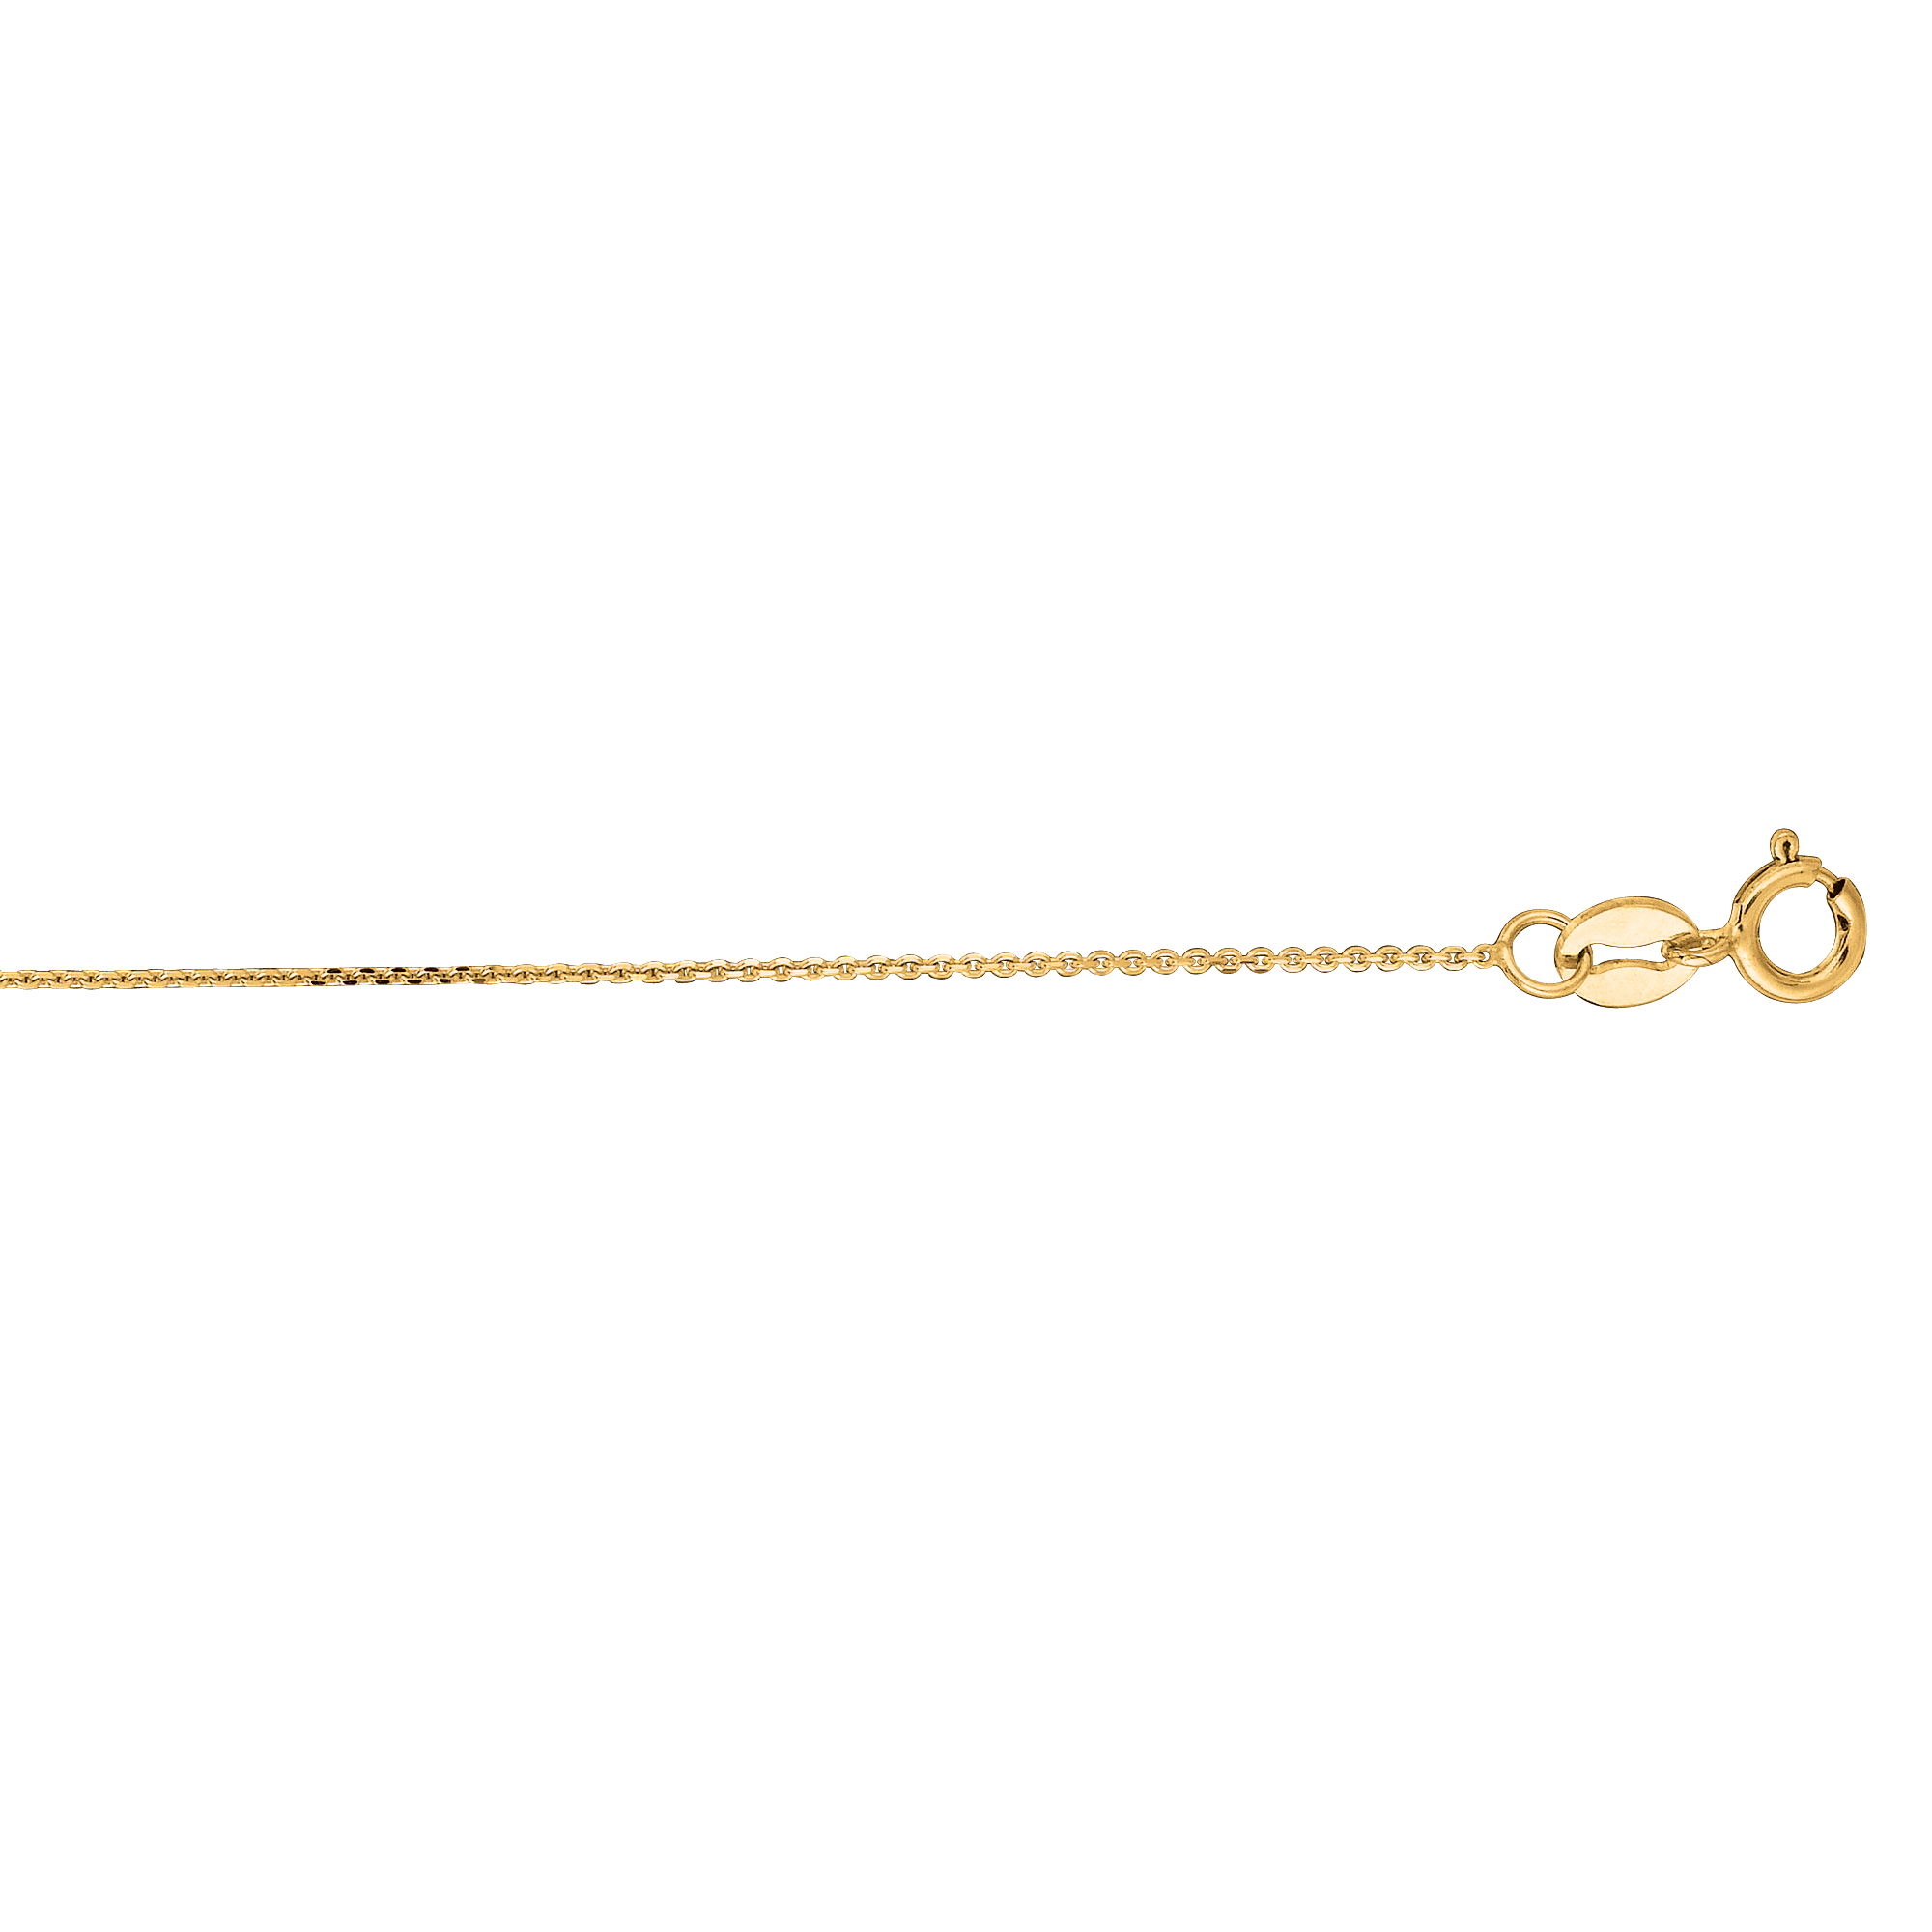 10k 18 inches Yellow Gold 0.5mm Round Cable Chain with Spring Ring Clasp